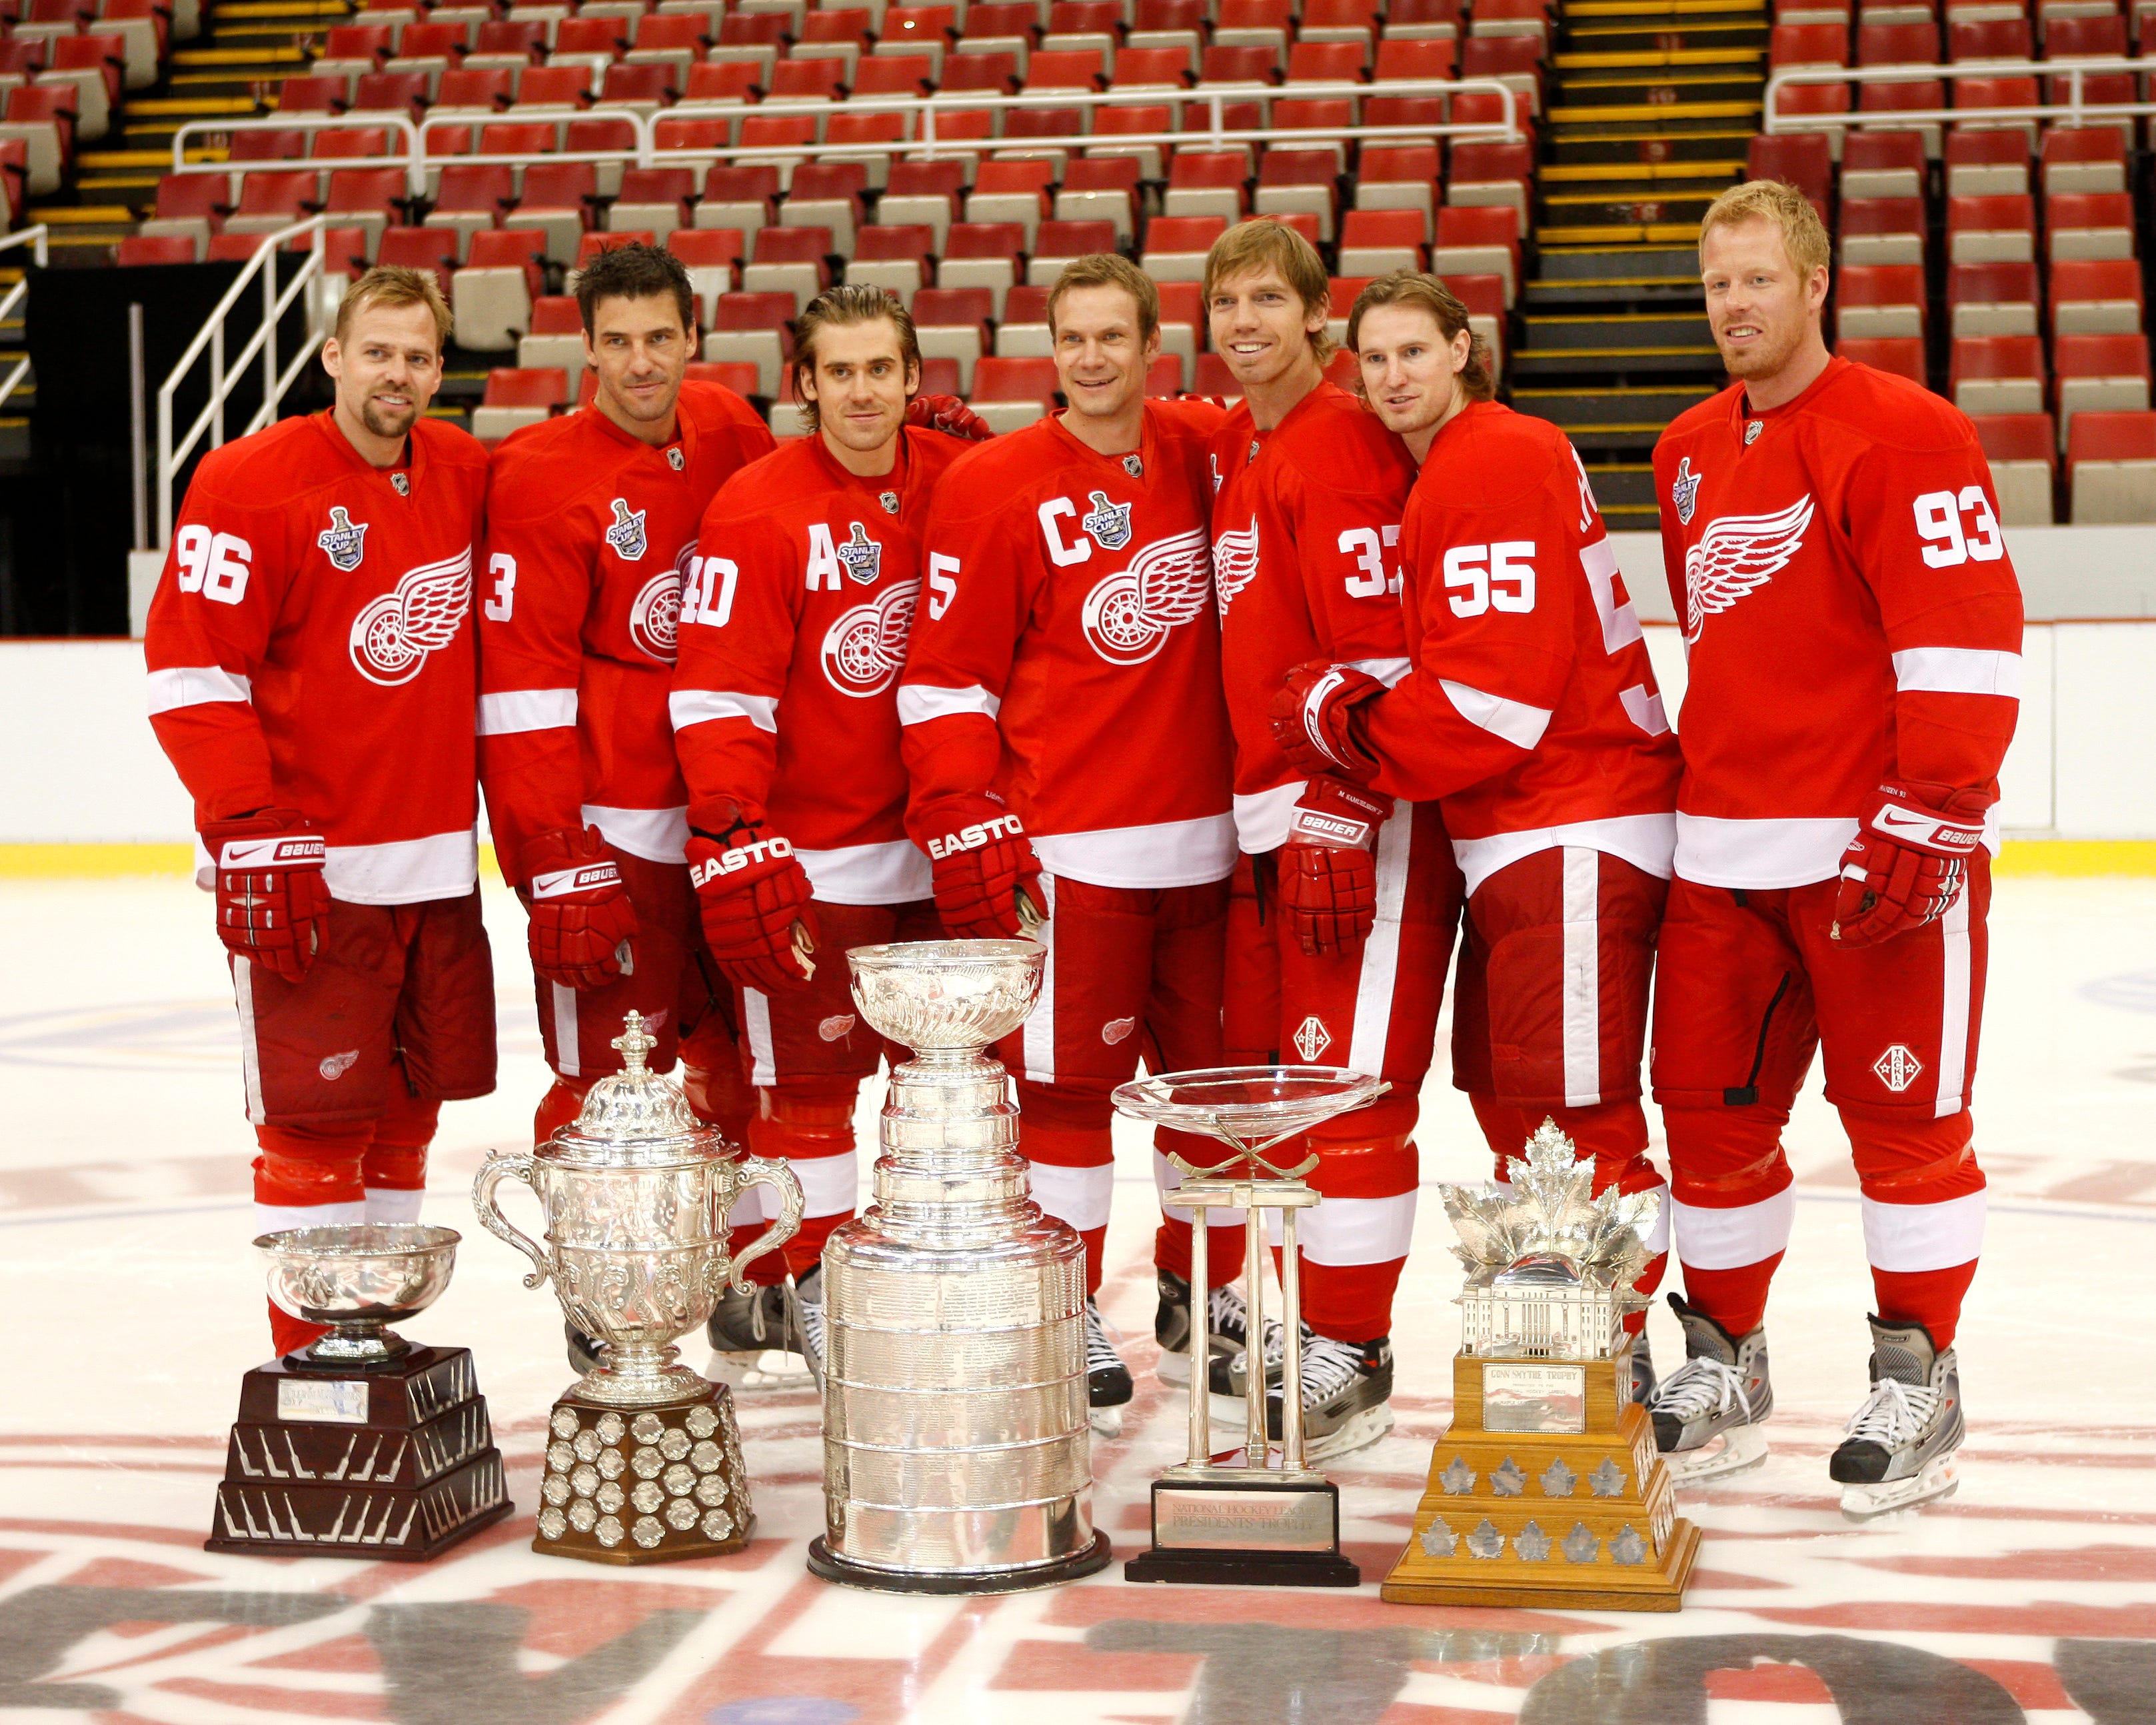 The Swedish contingent of the team pose with the various trophies won throughout the 2008 postseason. From left are Tomas Holmstrom, Andreas Lilja, Henrik Zetterberg, Nicklas Lidstrom, Mikael Samuelsson, Niklas Kronwall, and Johan Franzen